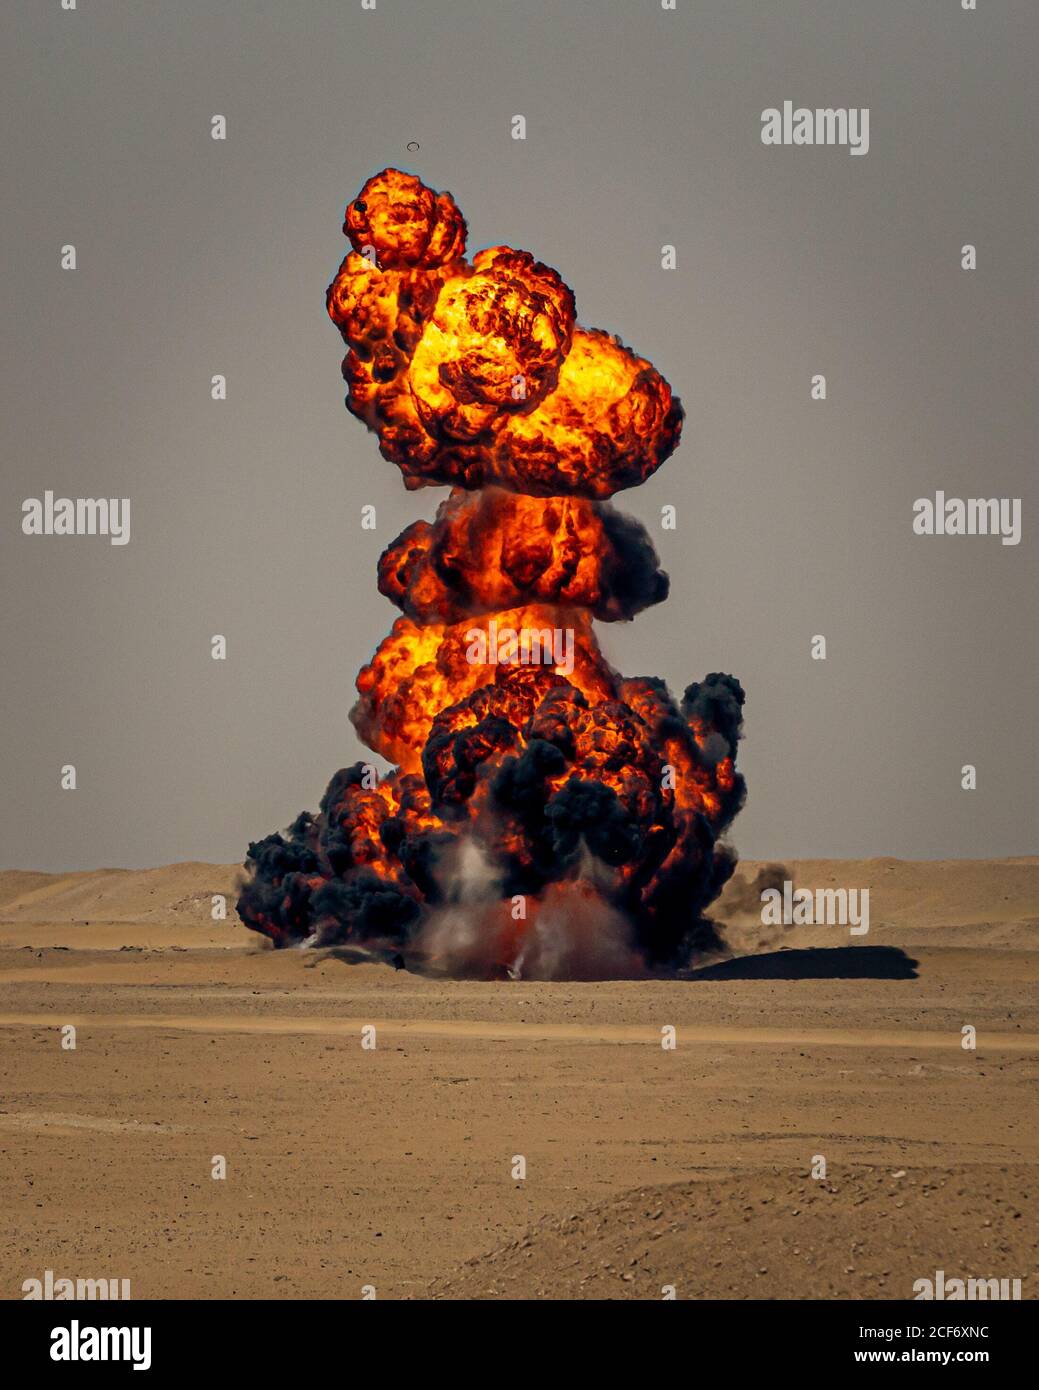 U.S. Marines with Special Purpose Marine Air-Ground Task Force Crisis Response - Central Command 20.2, detonate a flame fougasse during a demolition range in Kuwait, Sept. 1, 2020. Combat engineers conducted the demolition range to stay proficient in all areas of their military occupational specialty and to maintain mission readiness. The SPMAGTF-CR-CC is a crisis response force, prepared to deploy a variety of capabilities across the region. (U.S. Marine Corps photo Lance Cpl. Andrew Skiver) Stock Photo